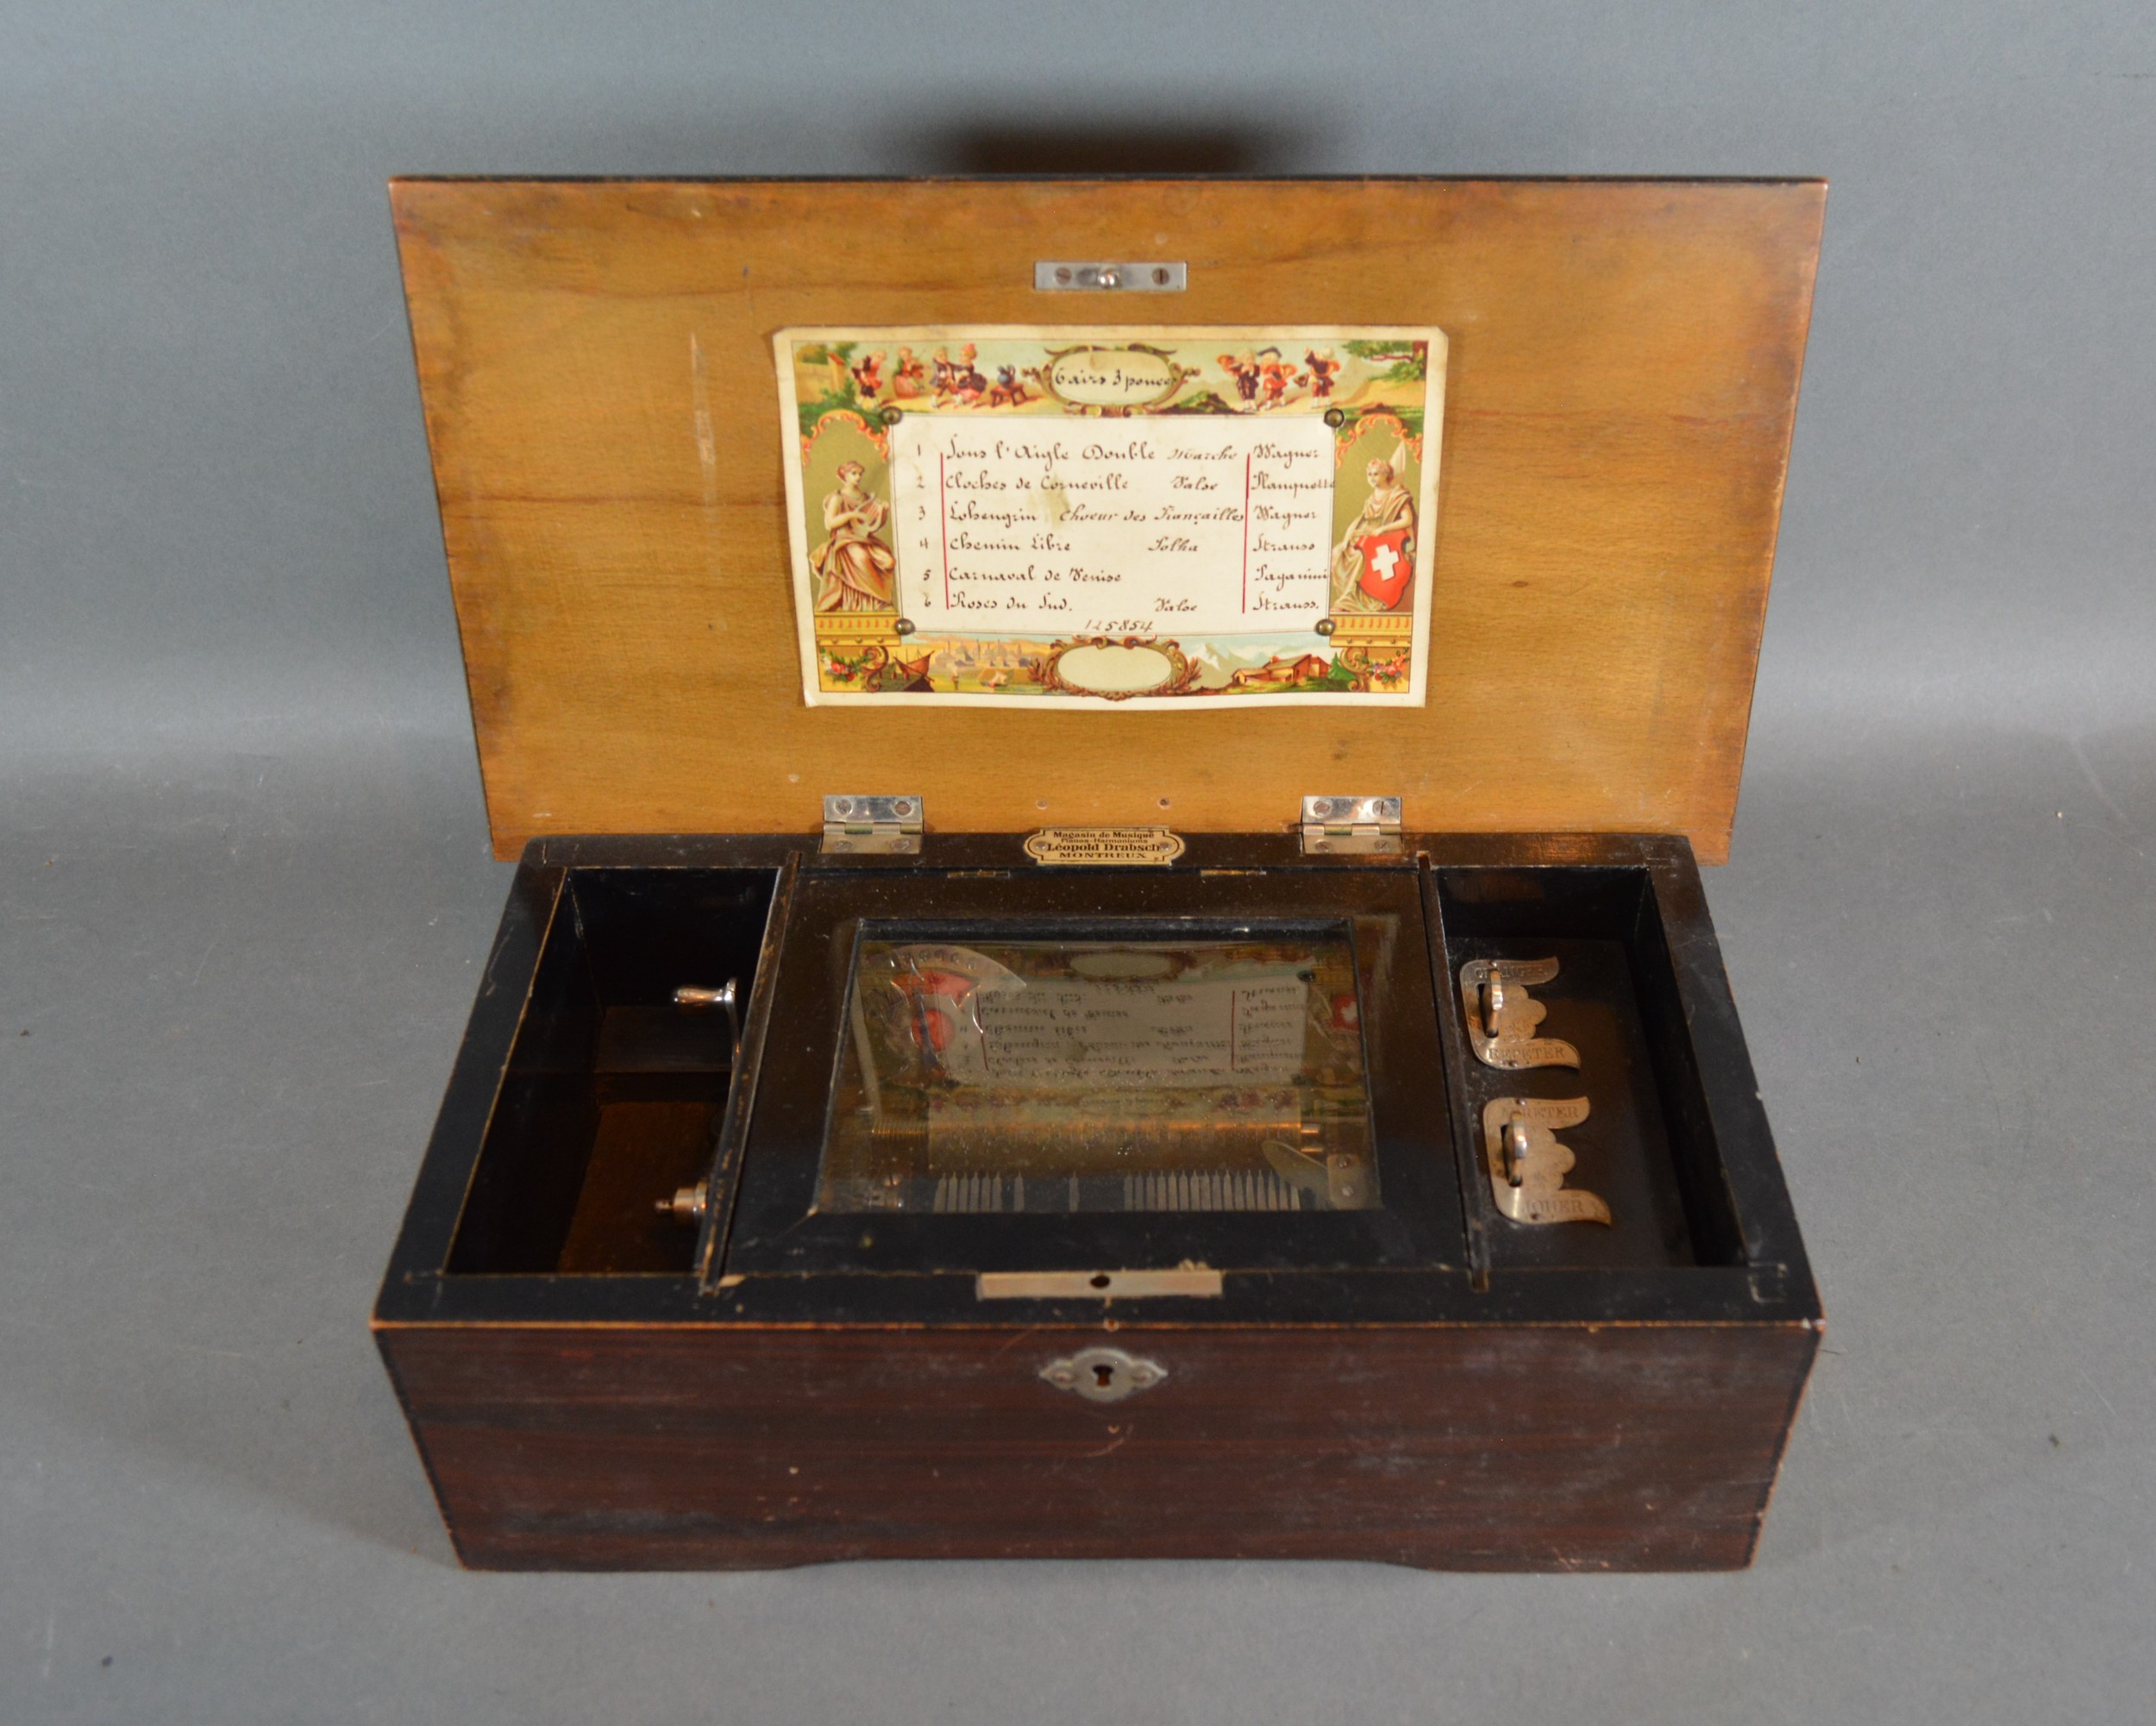 A 19th Century Swiss music box by Leopold Drabsch, with painted case and playing six airs, 18cms